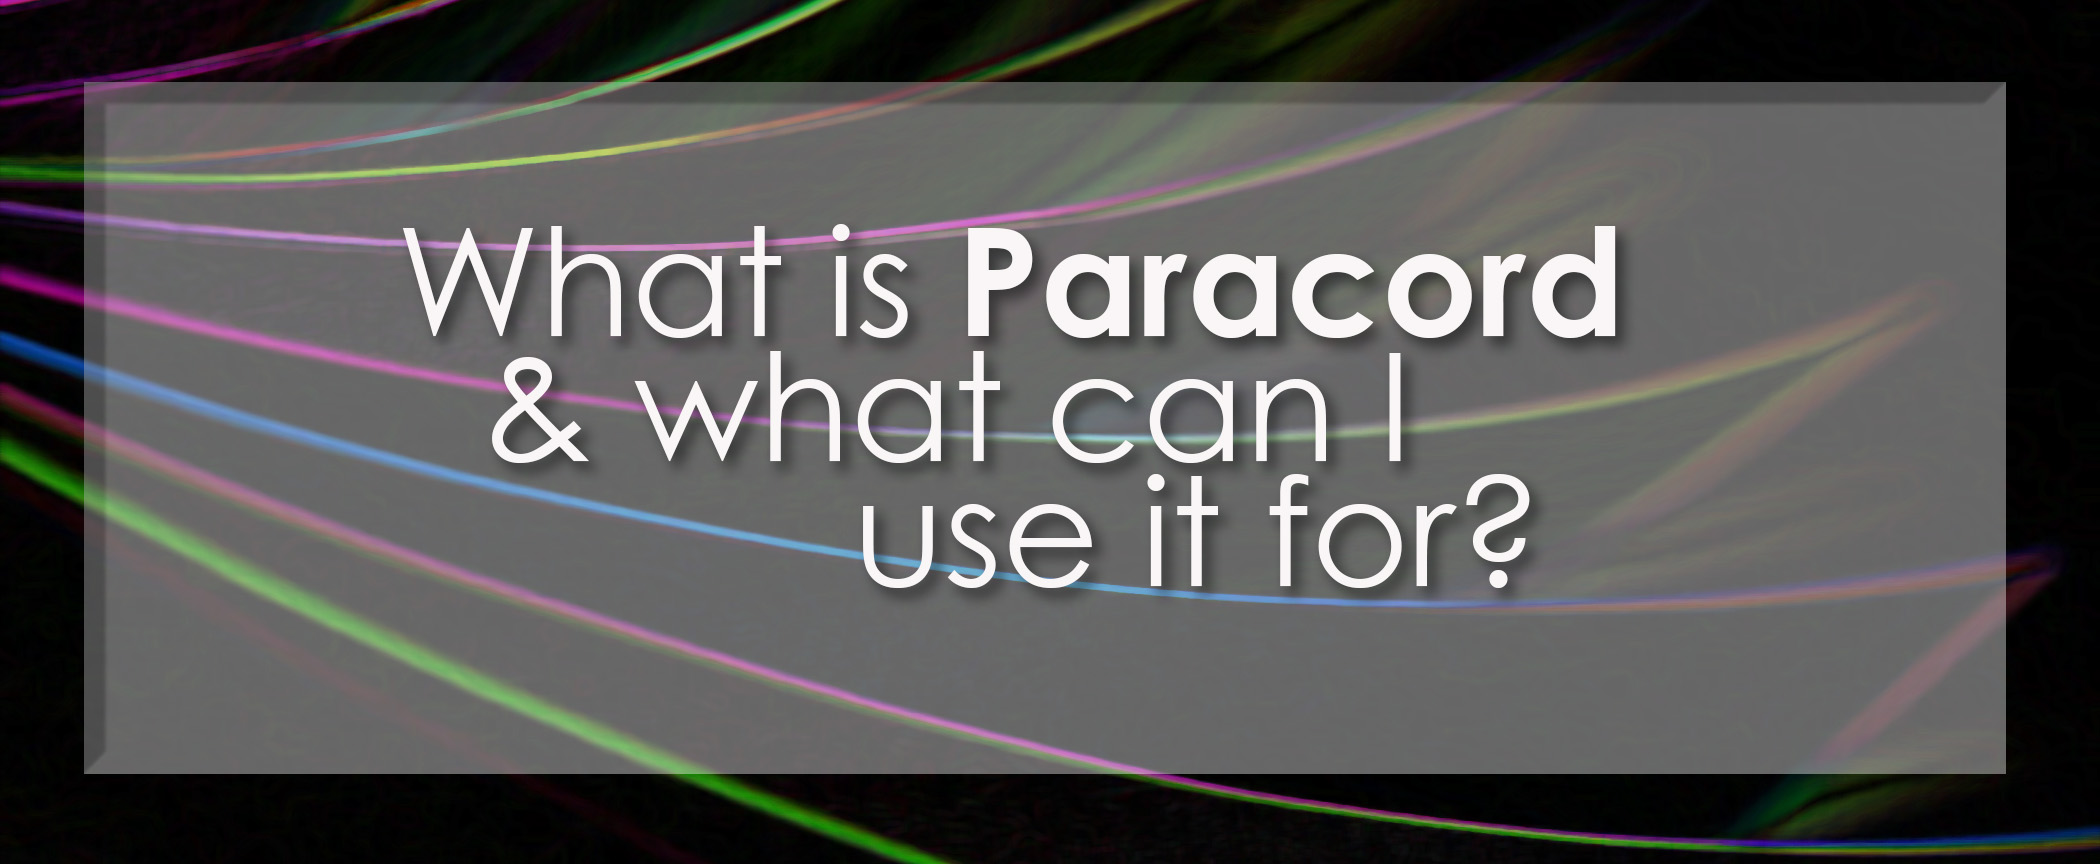 What Paracord is Right for Me? - Paracord Planet